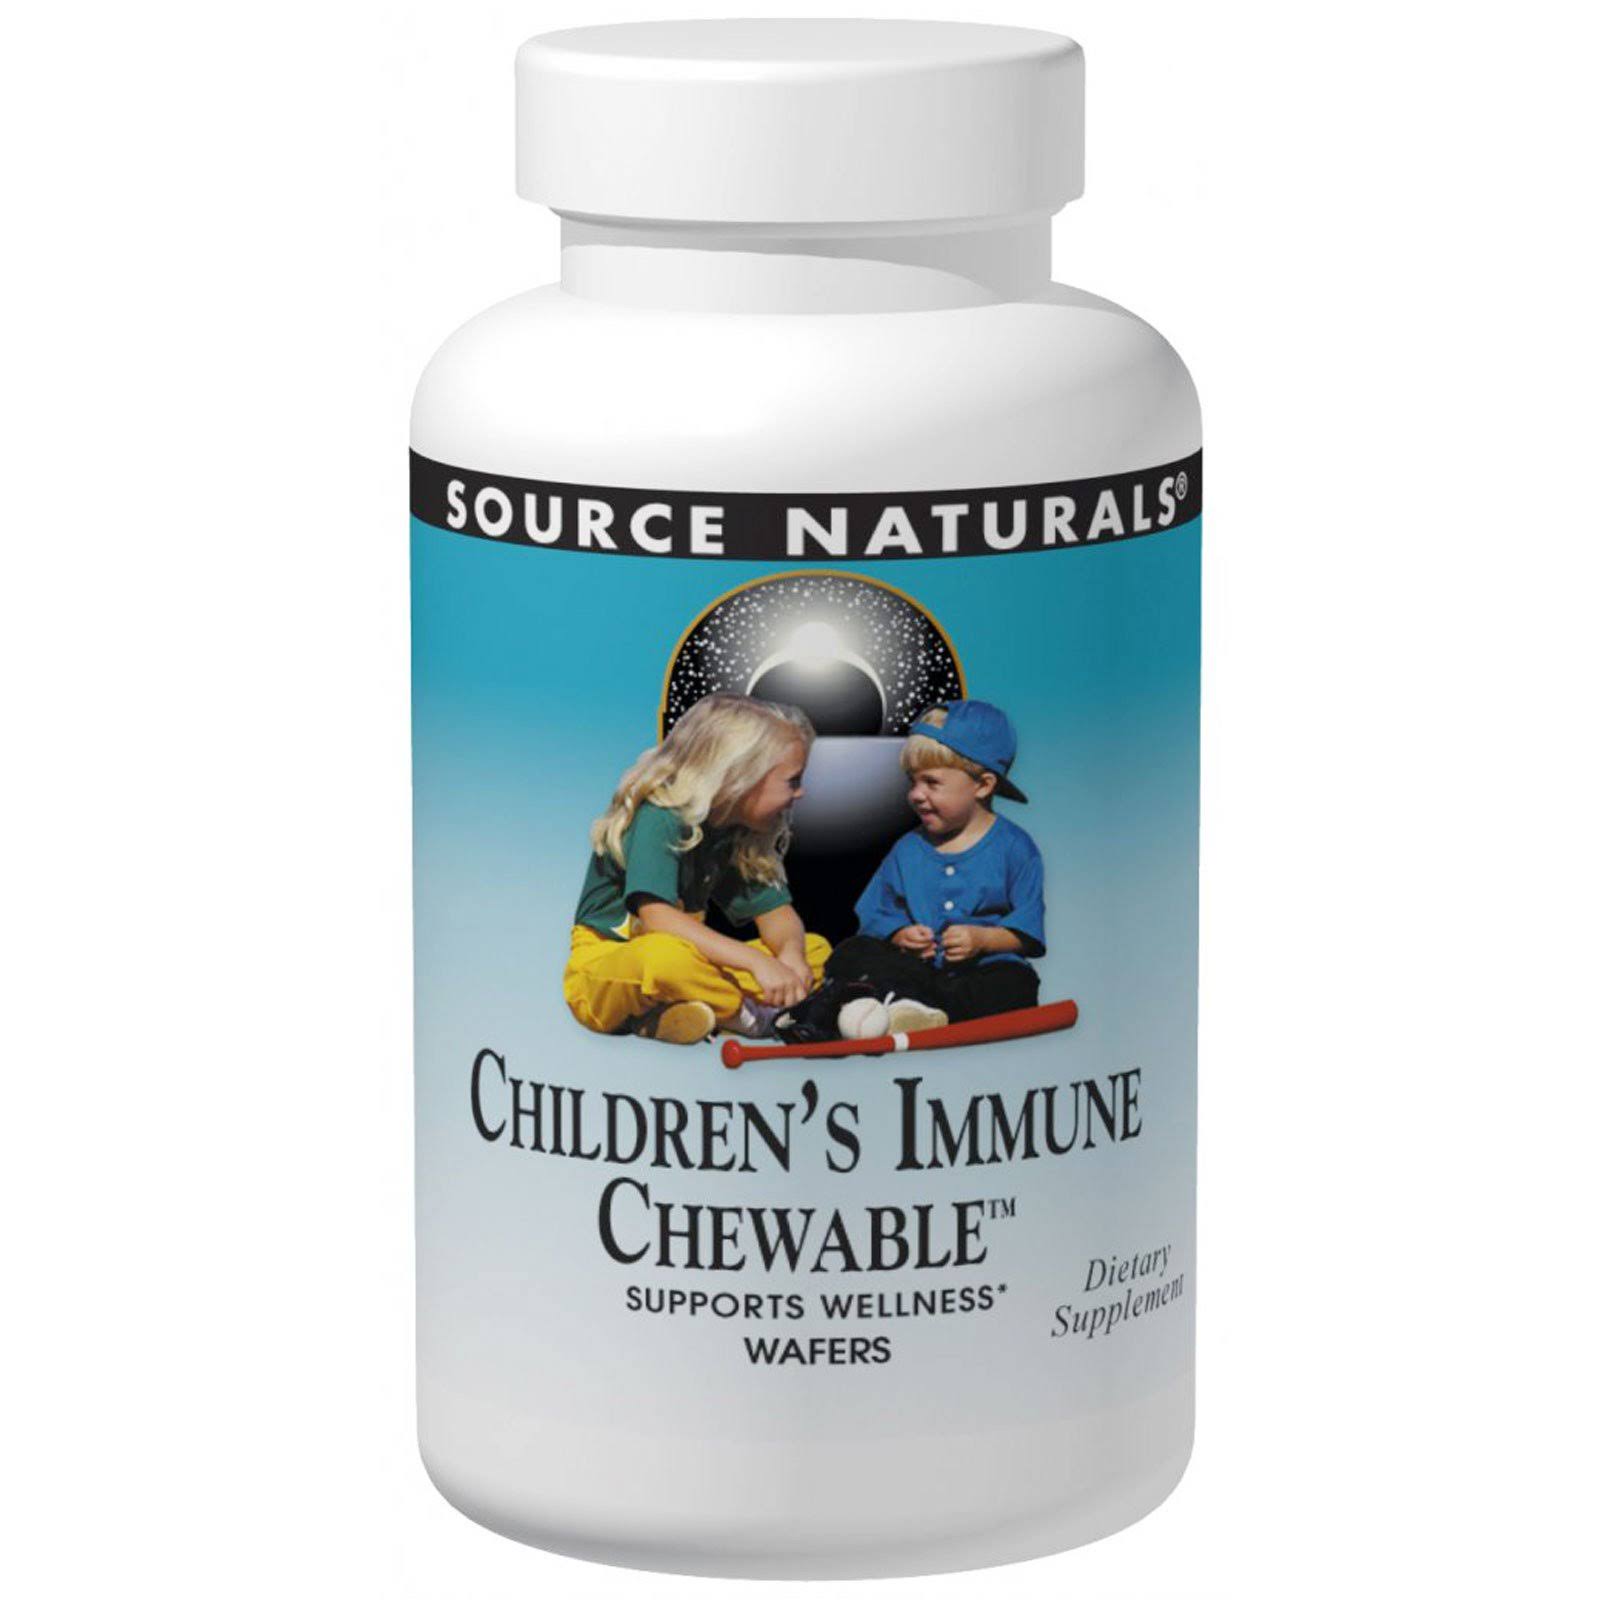 Source Naturals Children's Immune Chewable Wafers - 30 Wafers